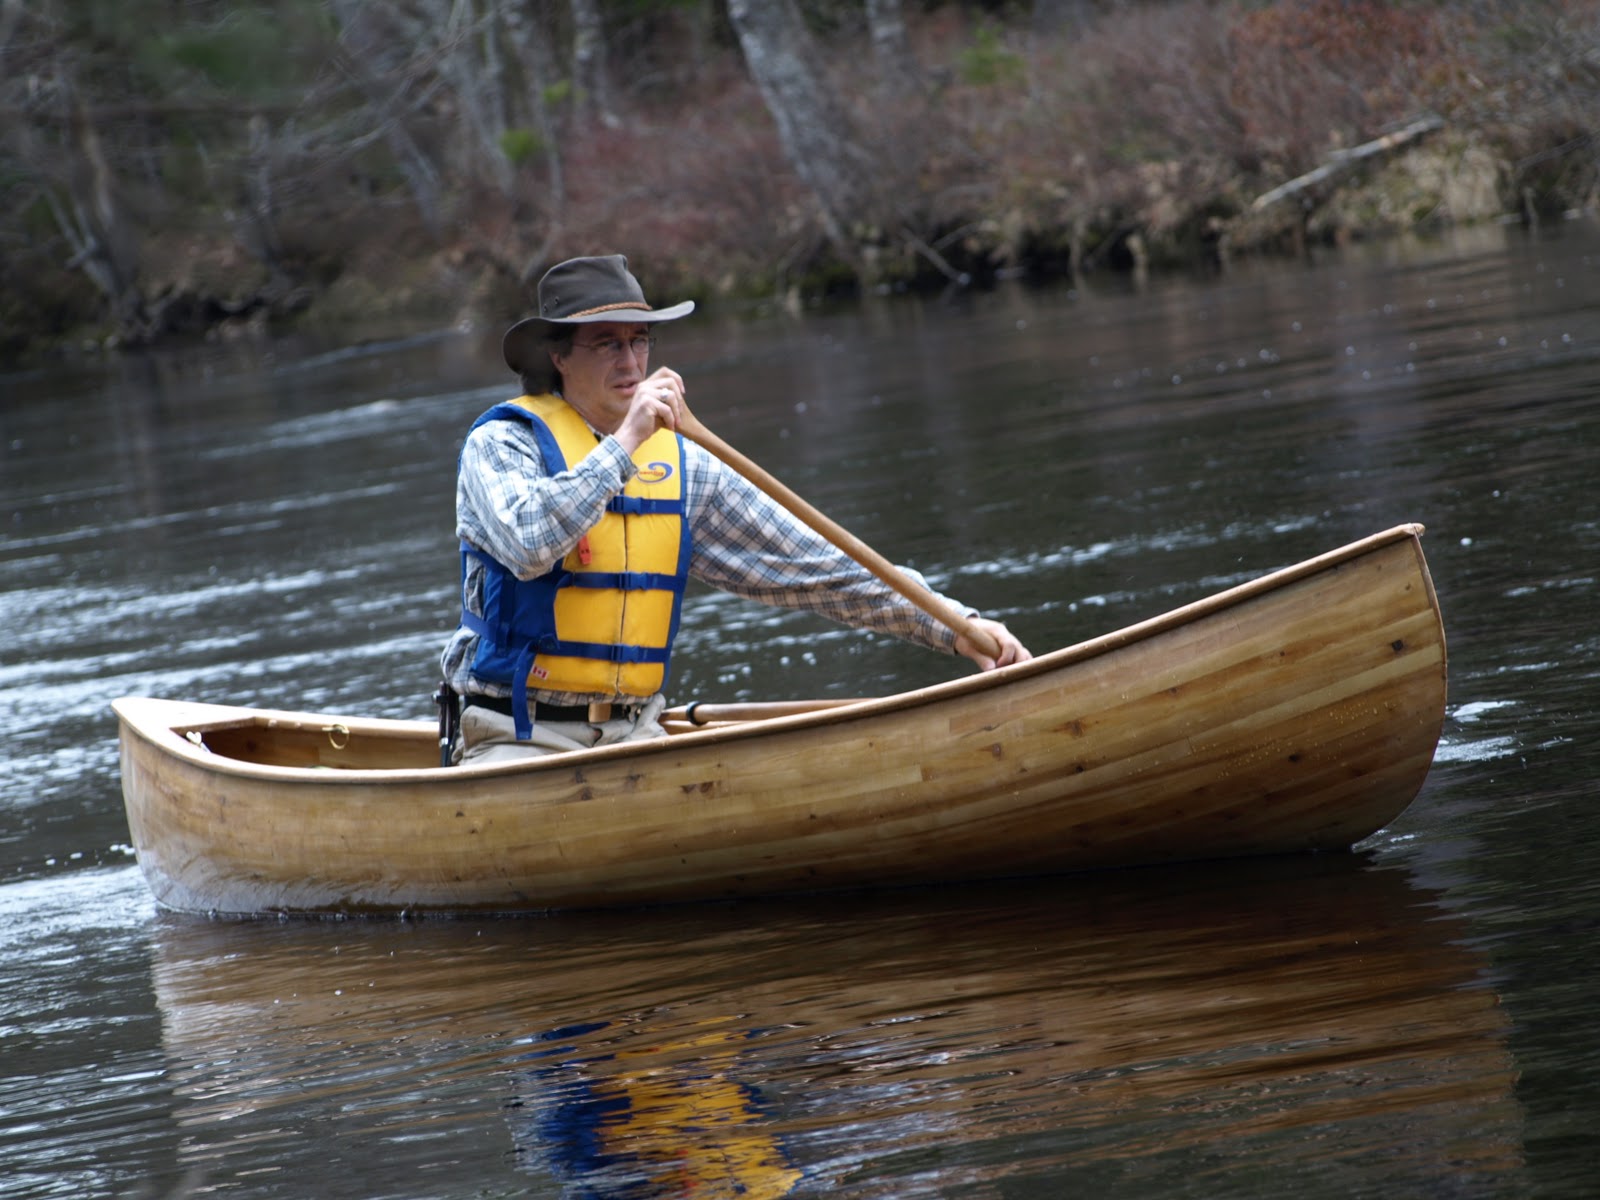 canoeing is something that i have always been interested in but rarely 